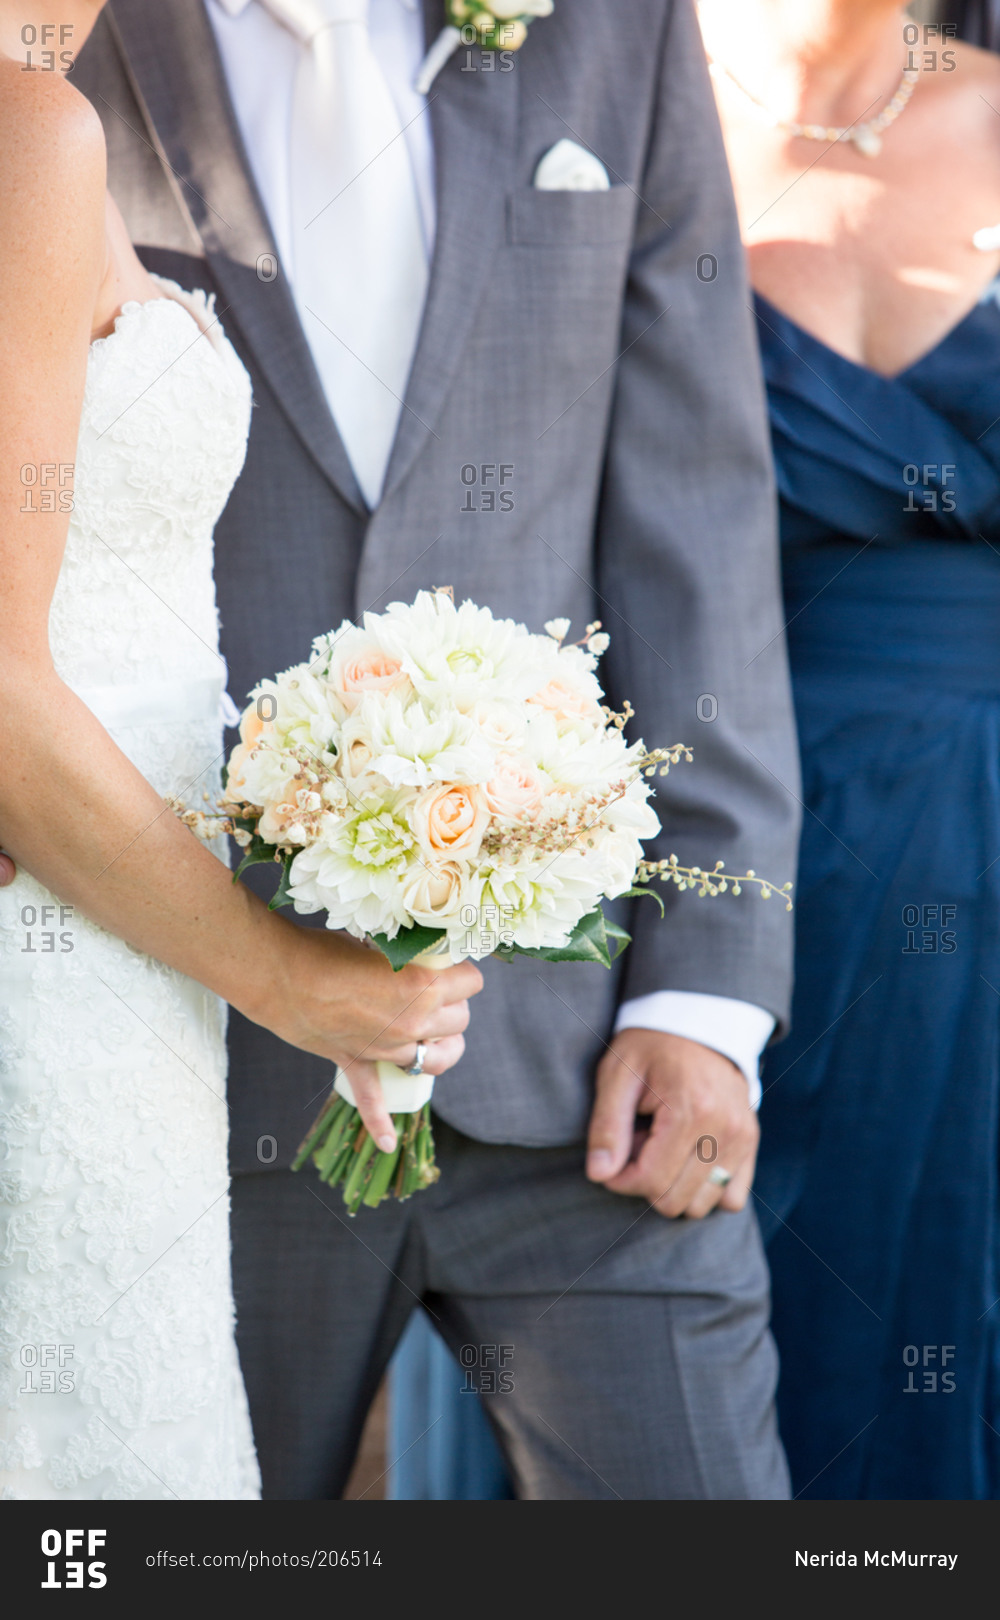 Bride holding a wedding bouquet next to the groom